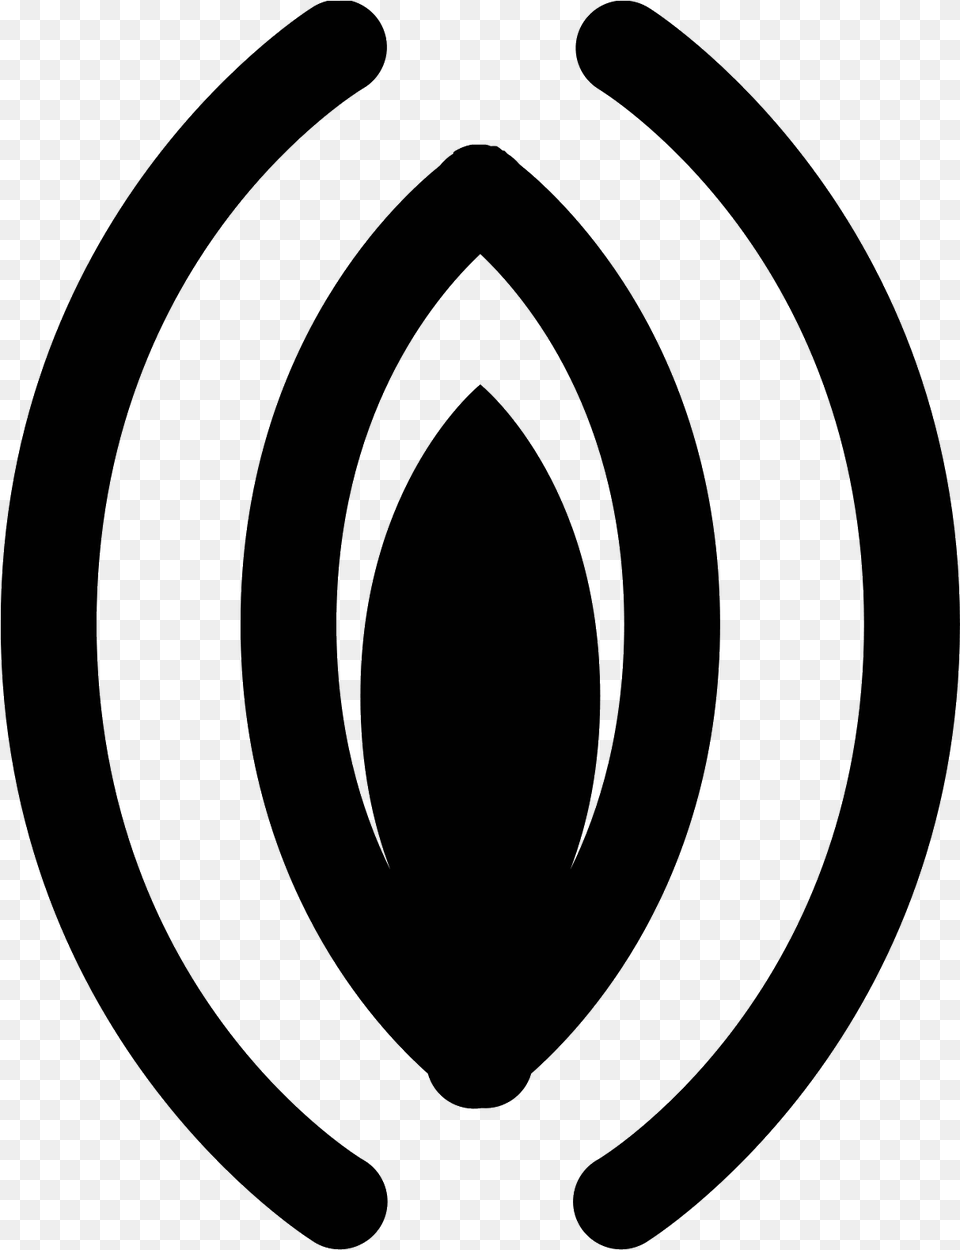 The Icon Is Shaped Like Two Parentheses Facing Each Vagina Icon White, Gray Free Transparent Png